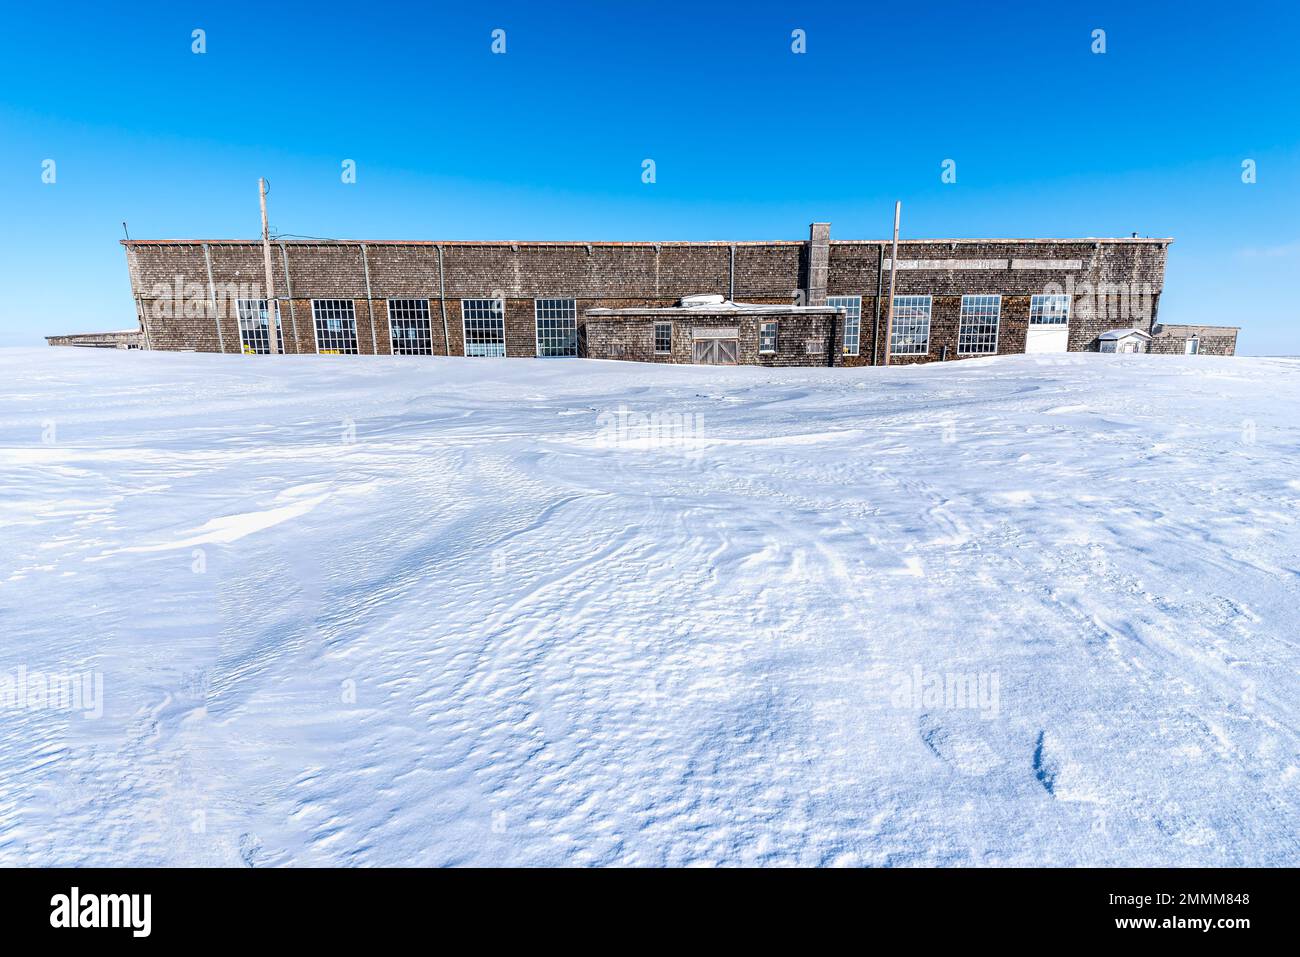 Swift Current, SK, Canada - 6 marzo 2022: Hangar No. 6, Old World War II Building in the Snow at the Swift Current, Saskatchewan Airport Foto Stock